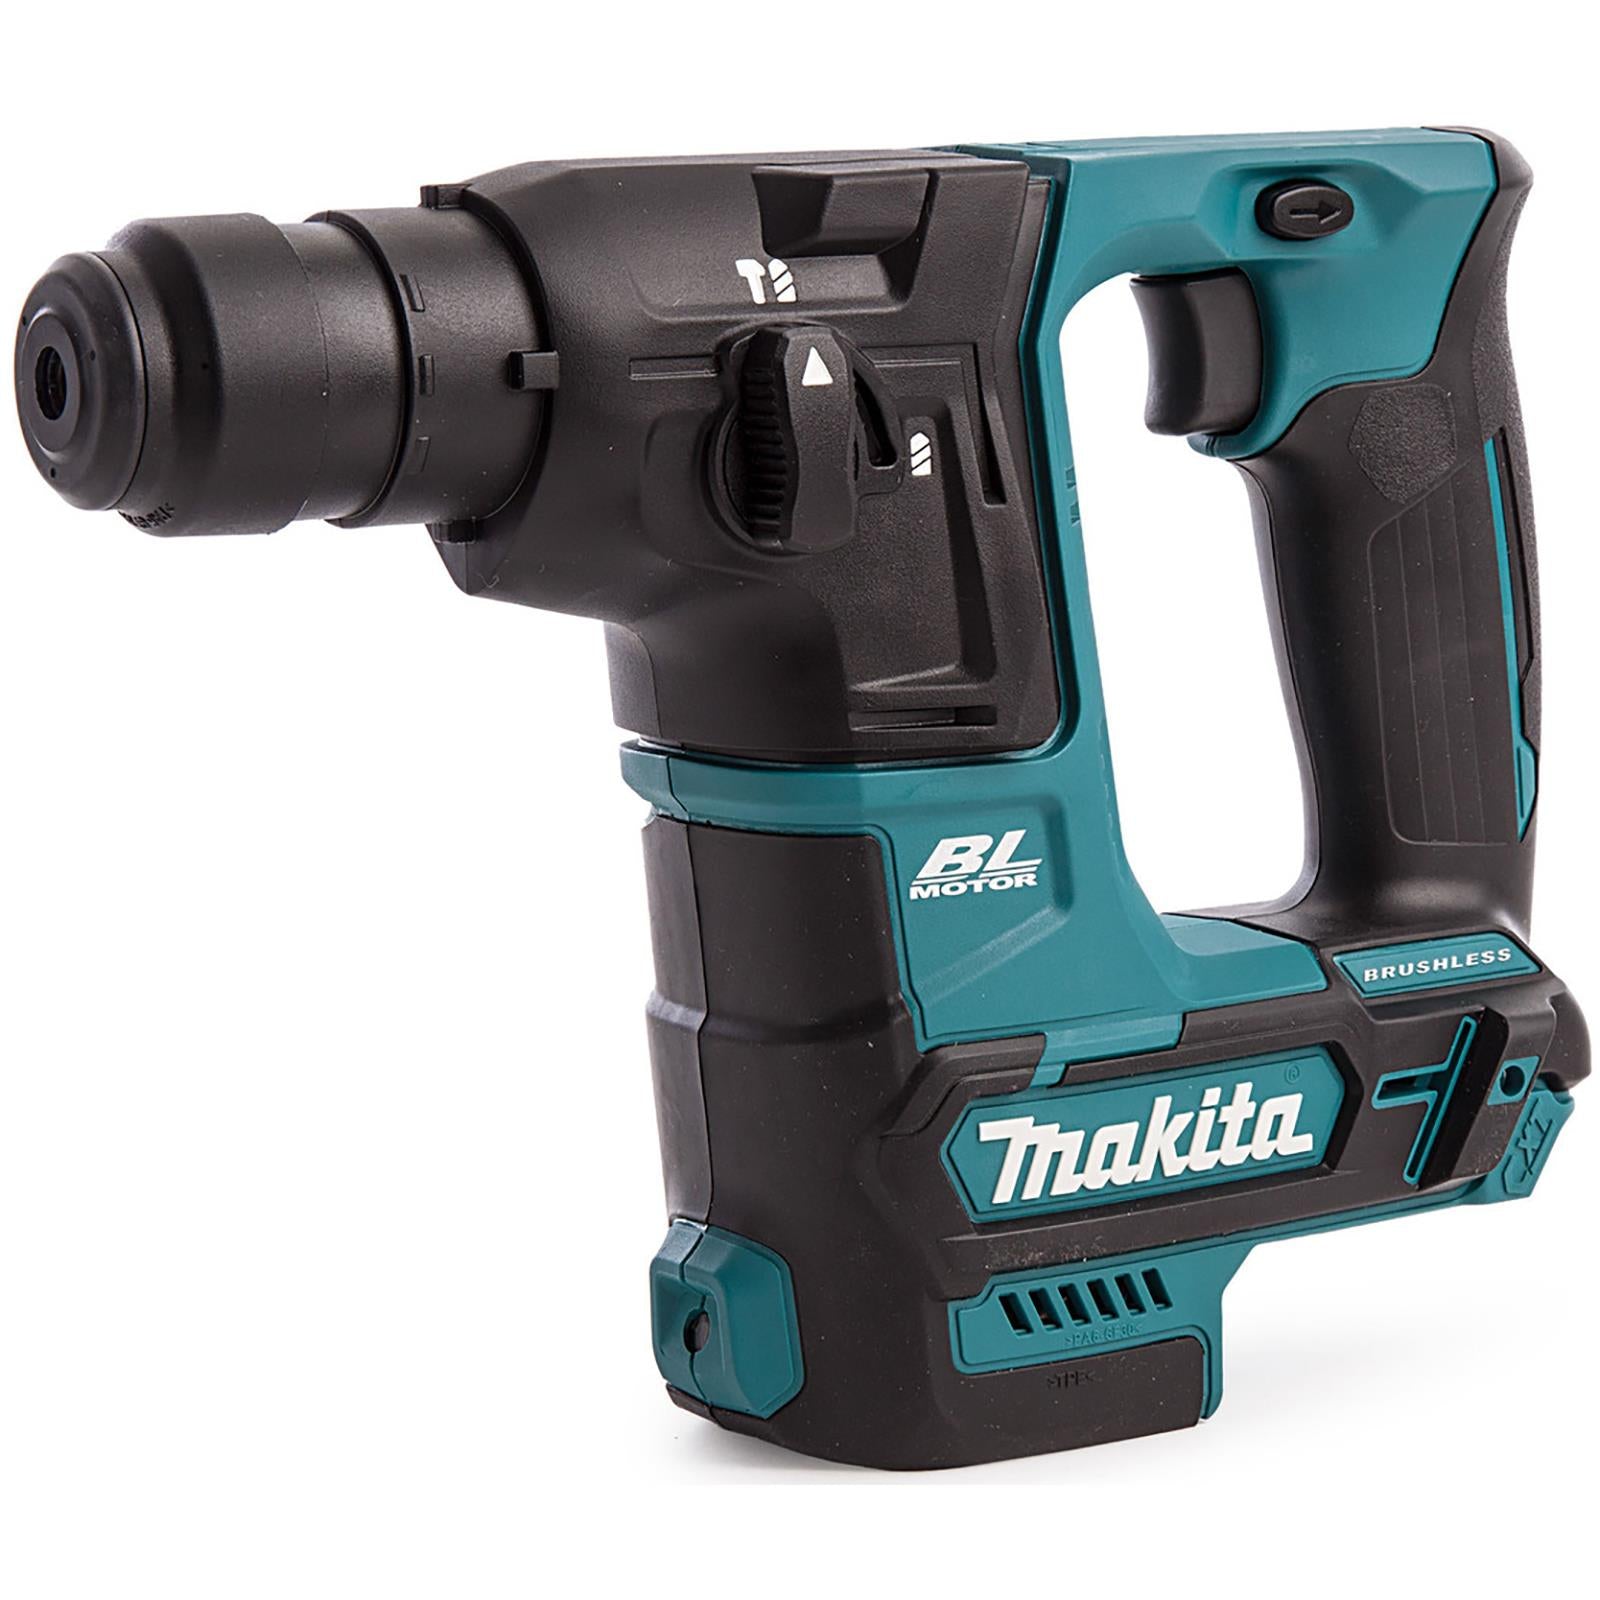 Makita Rotary Hammer Drill SDS+ Plus Compact Brushless CXT HR166DZ Body Only